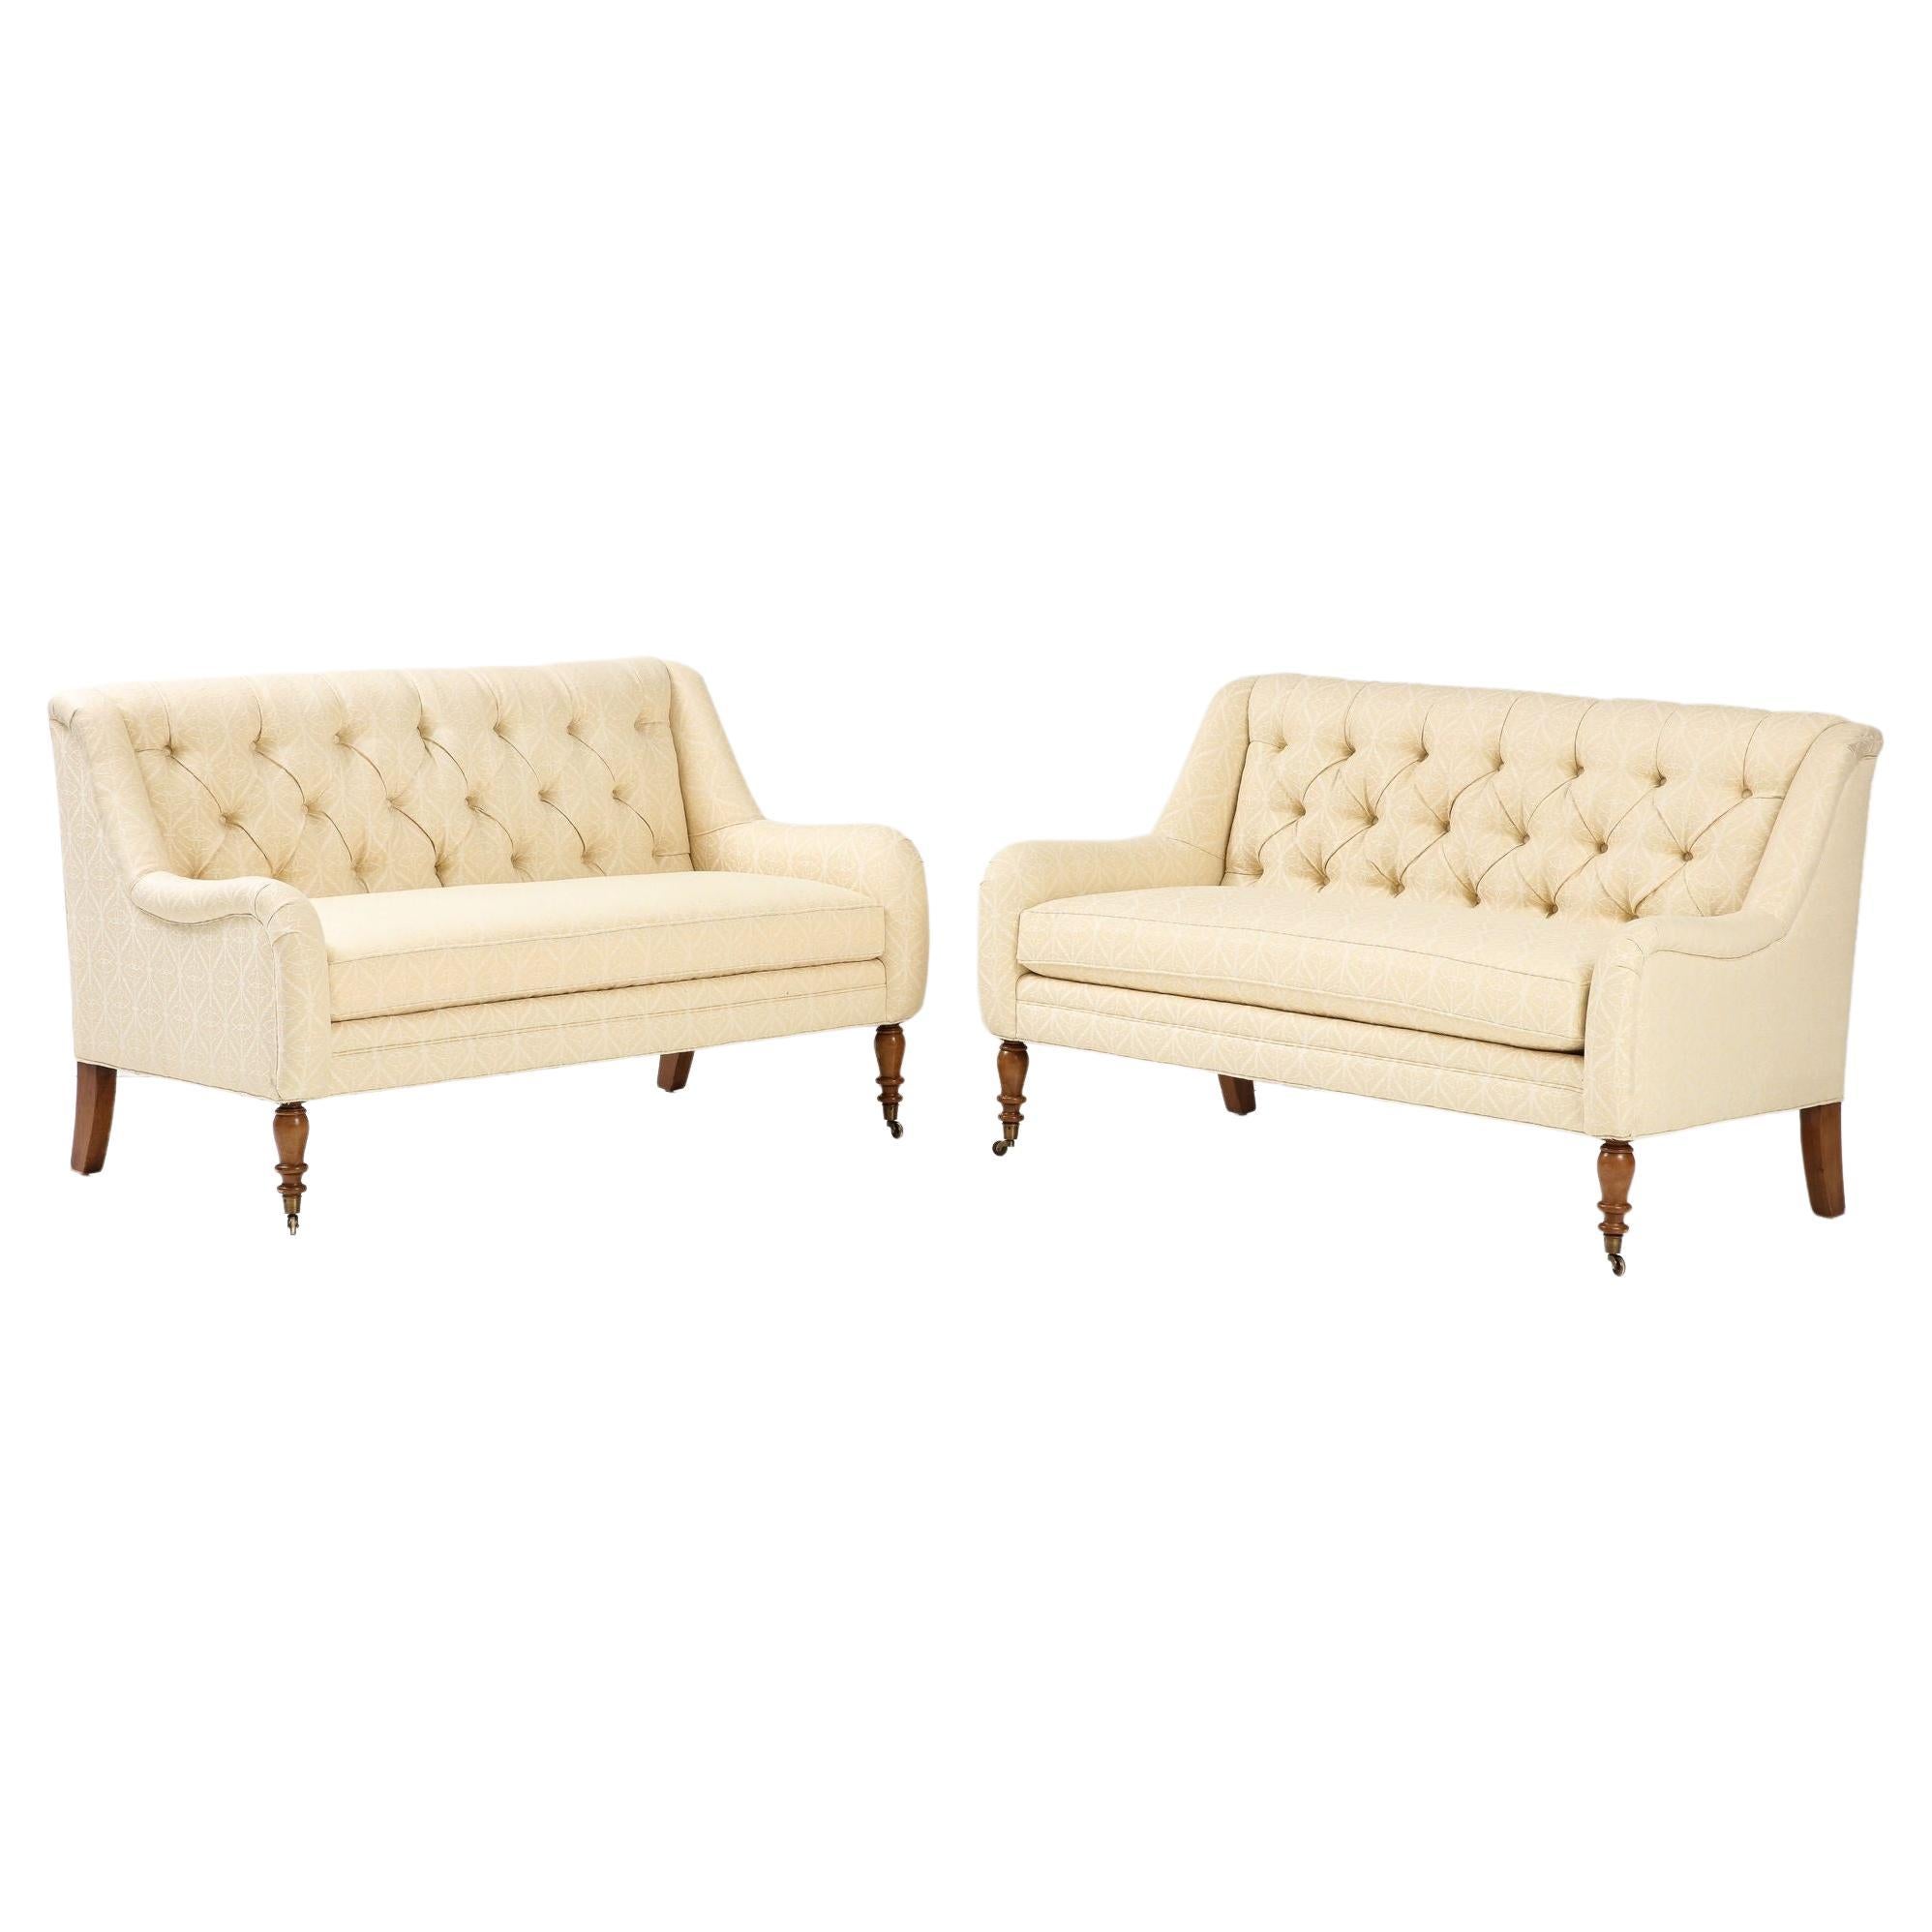 Pair of Tufted Loveseats For Sale